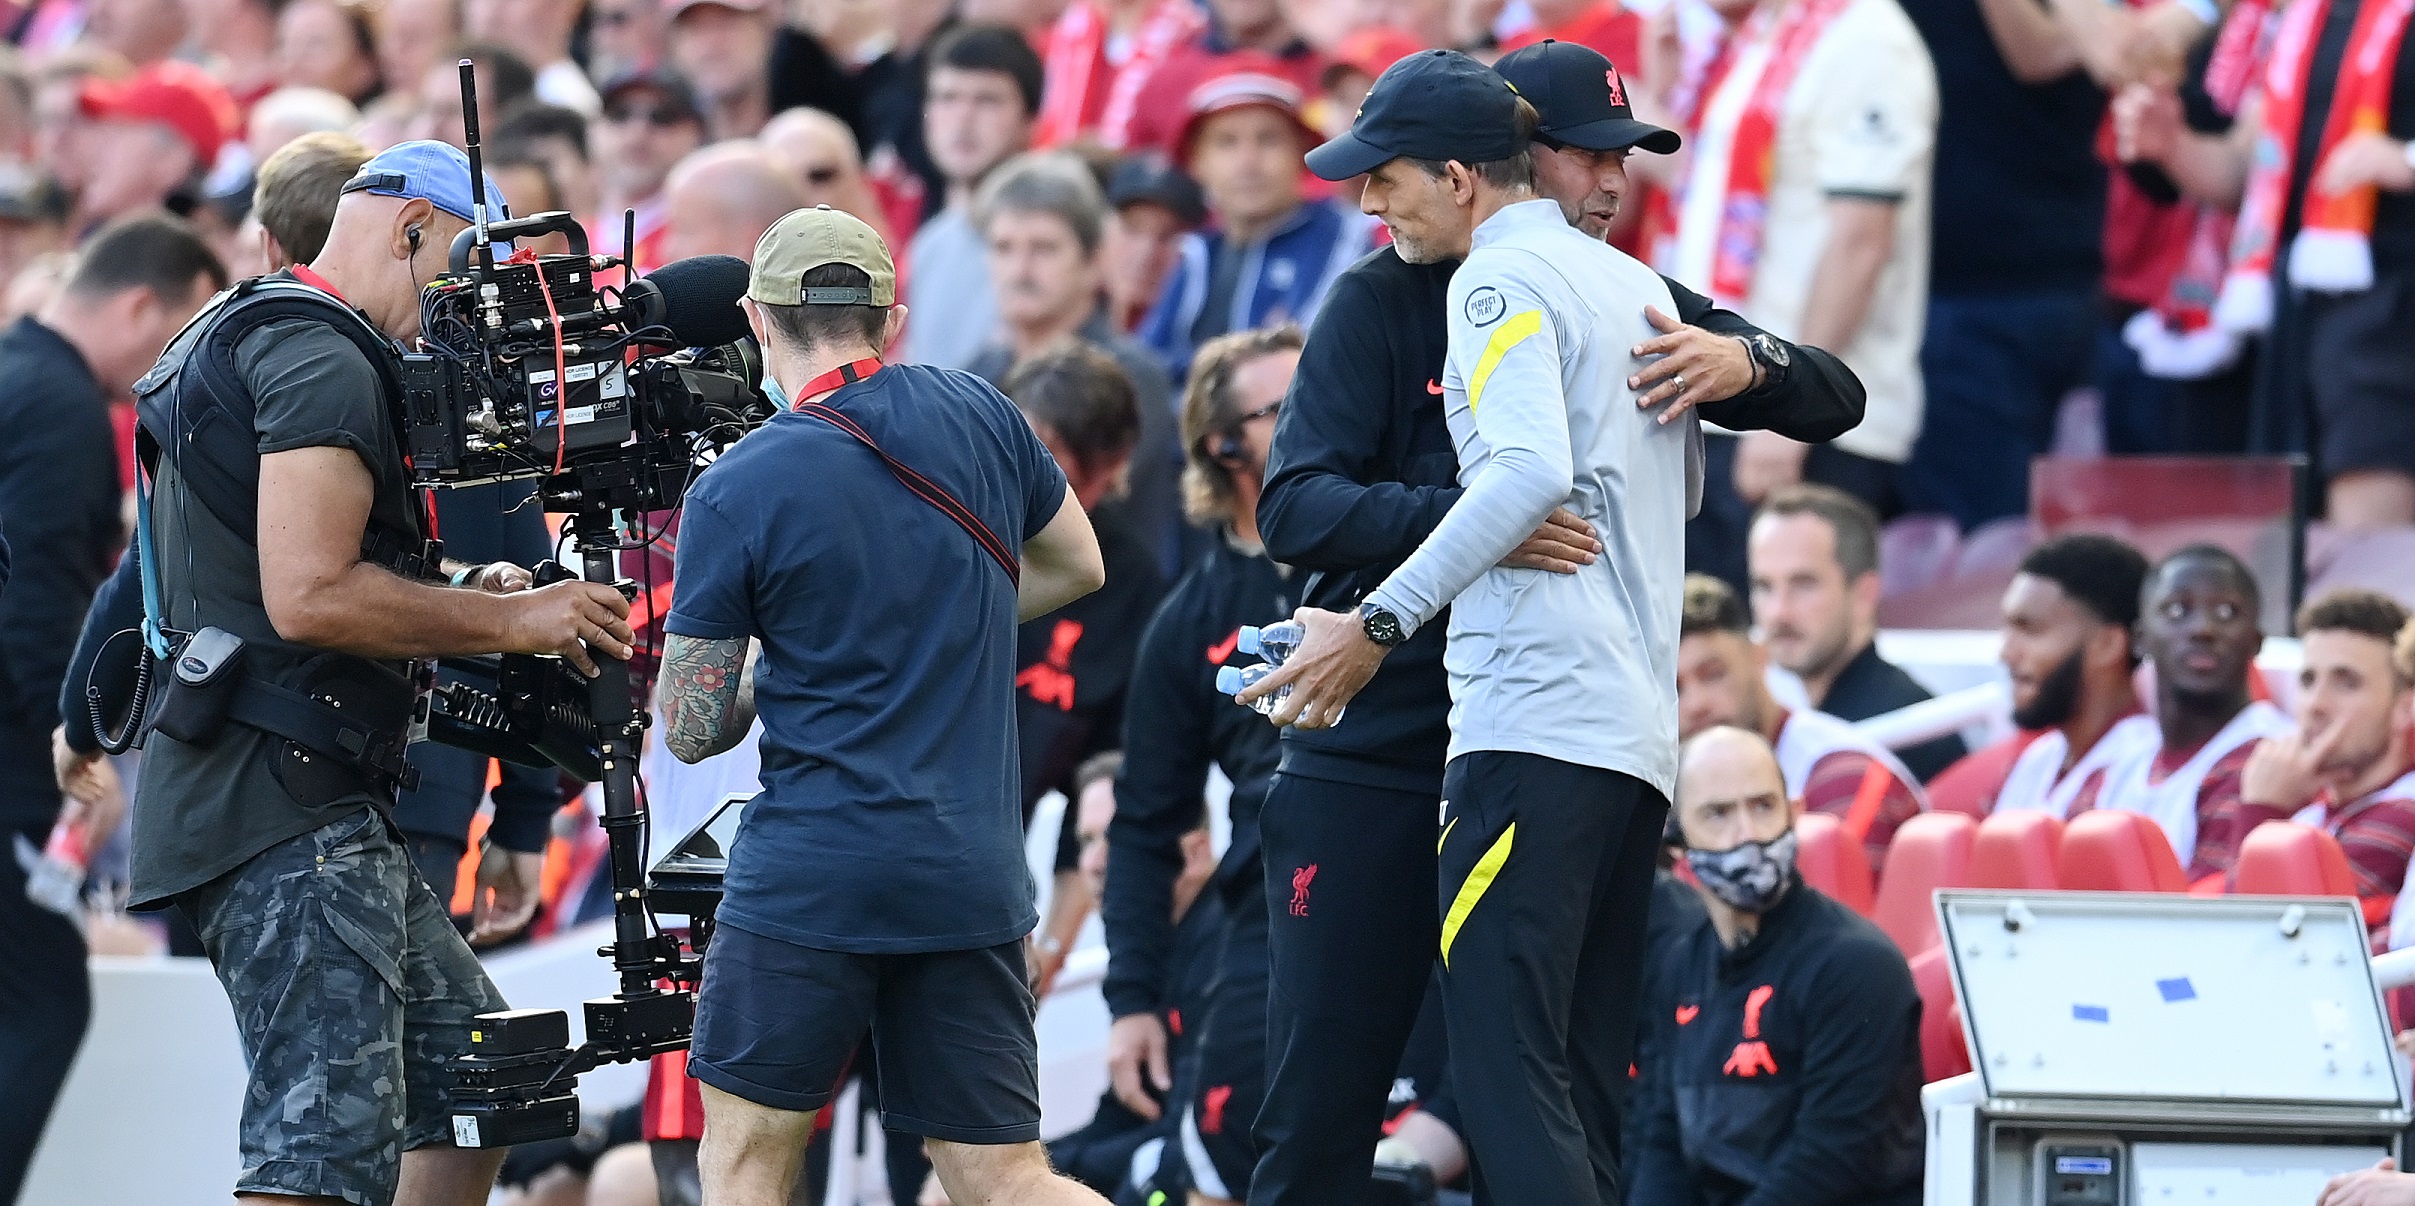 Chelsea manager Thomas Tuchel weighs in on his side’s chances of catching Liverpool in this season’s Premier League